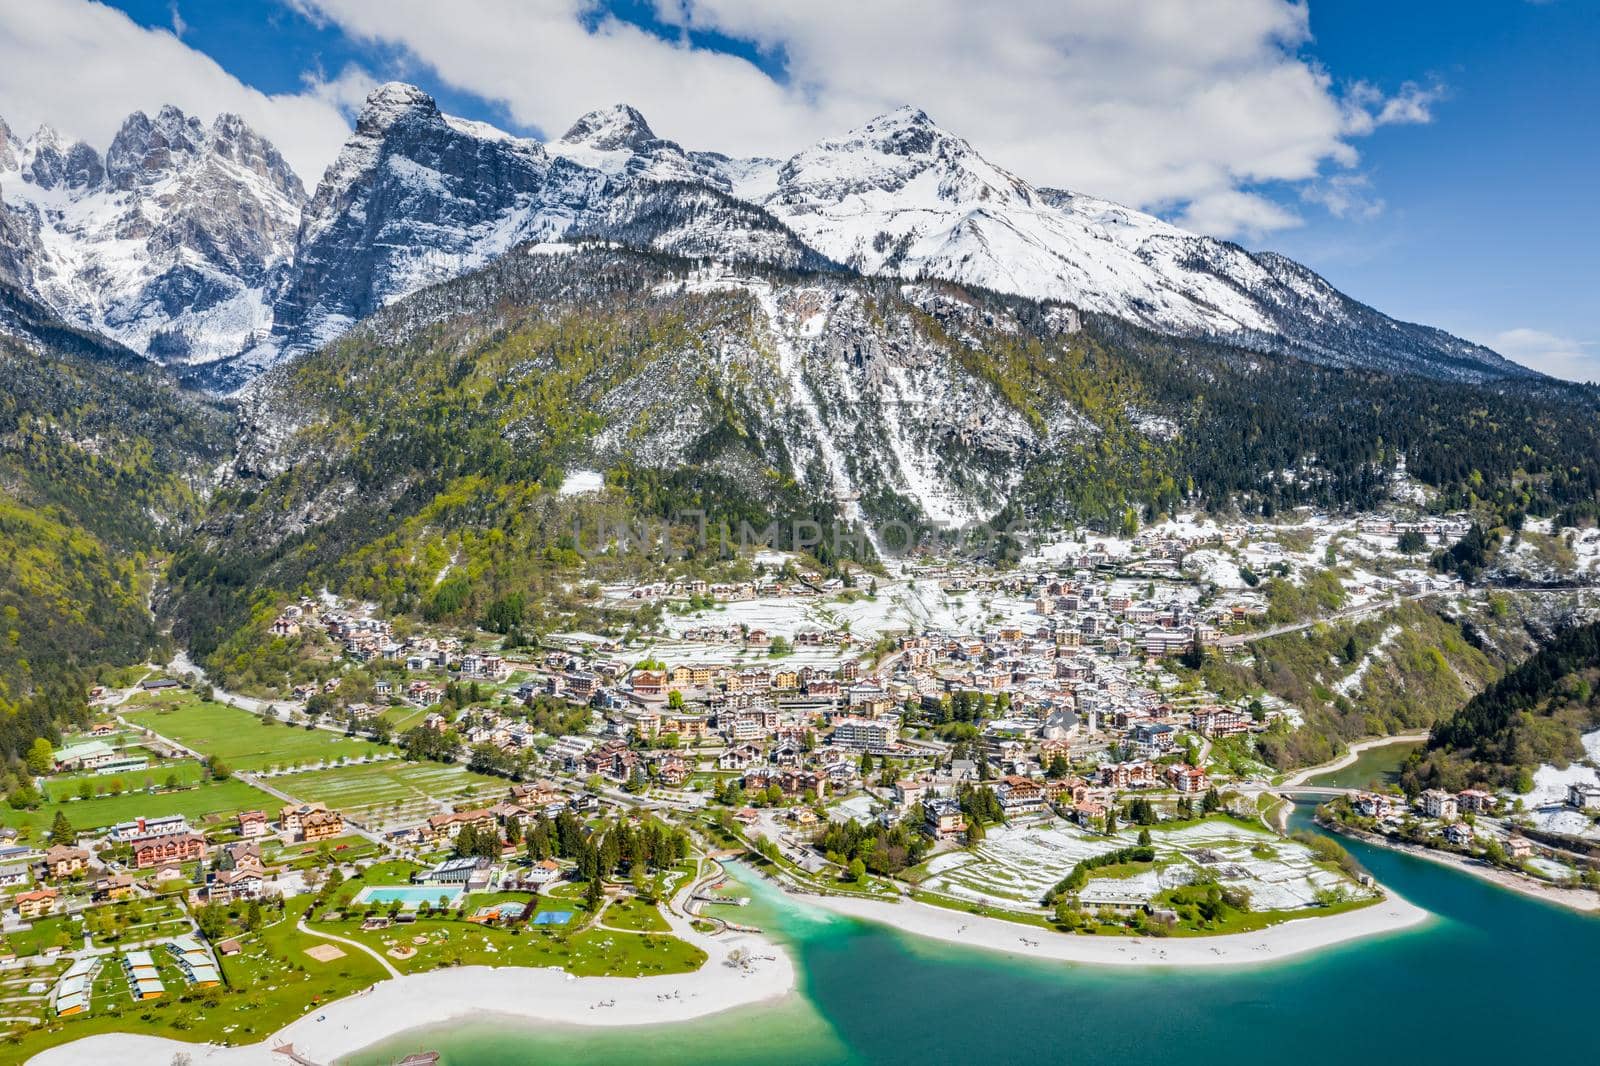 The Improbable aerial landscape of village Molveno, Italy, azure water of lake, empty beach, snow covered mountains Dolomites on background, roof top of chalet, sunny weather, a piers, coastline, by vladimirdrozdin